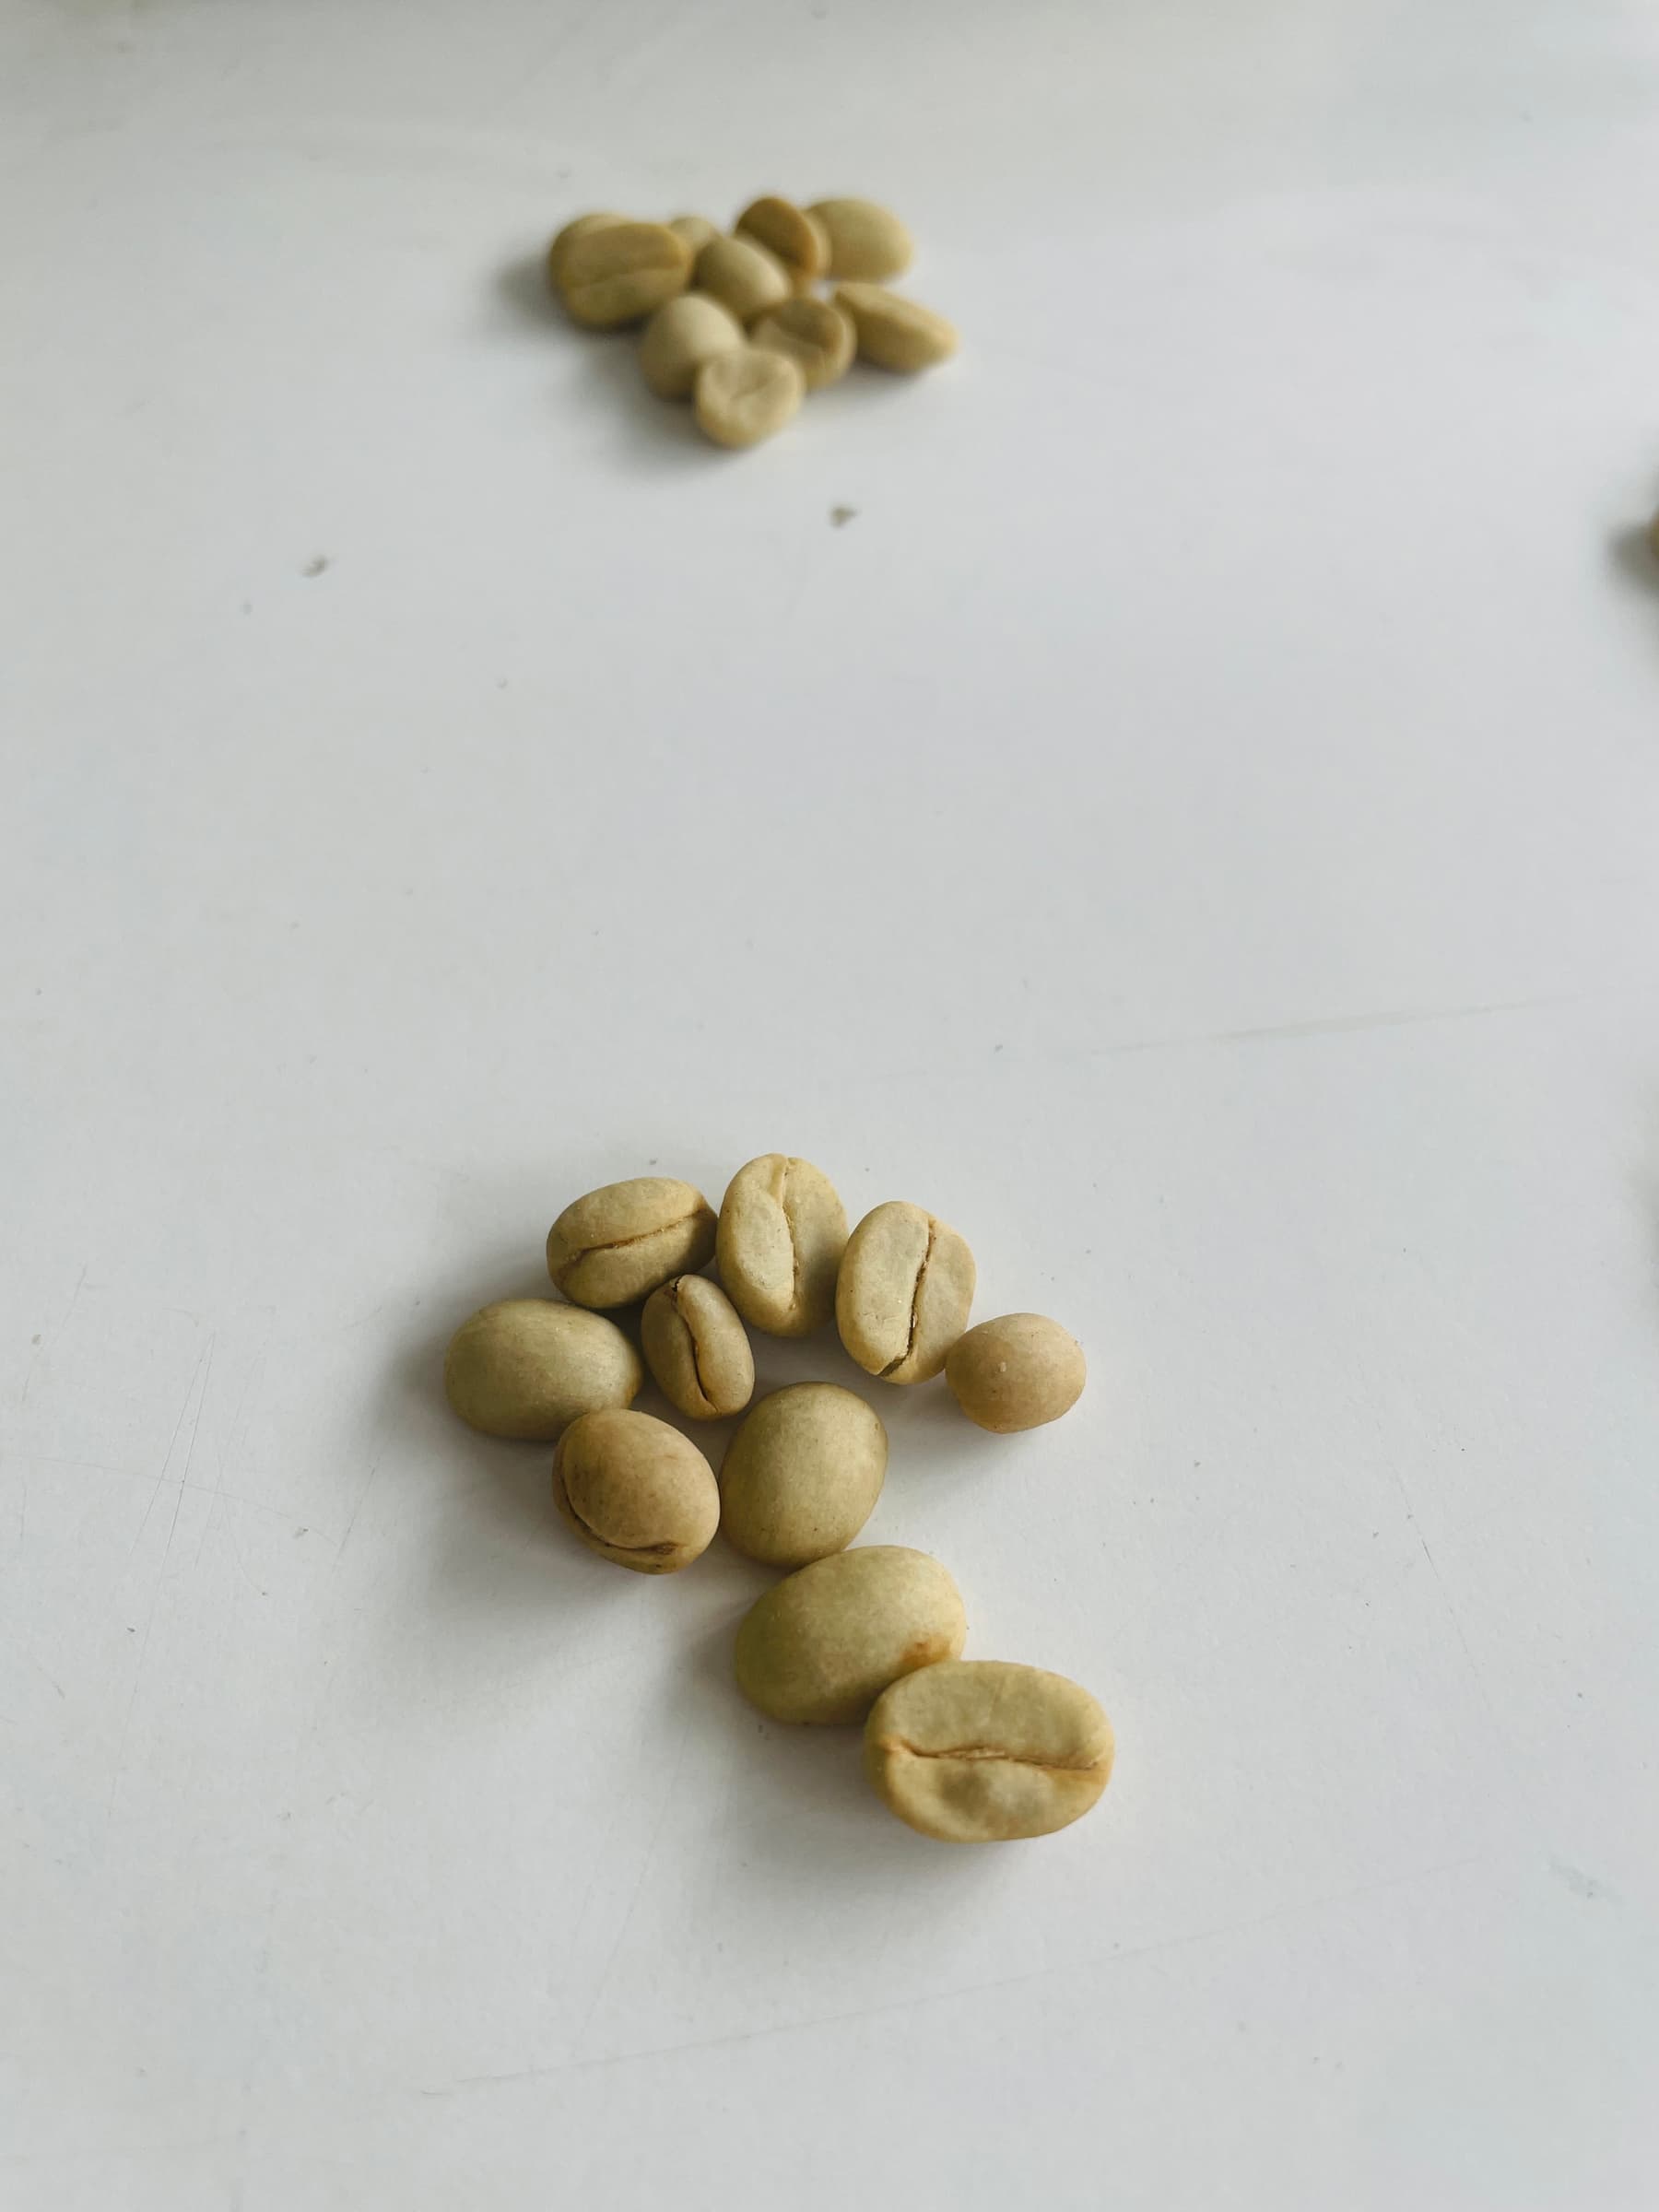 Counting Innovea seed 1